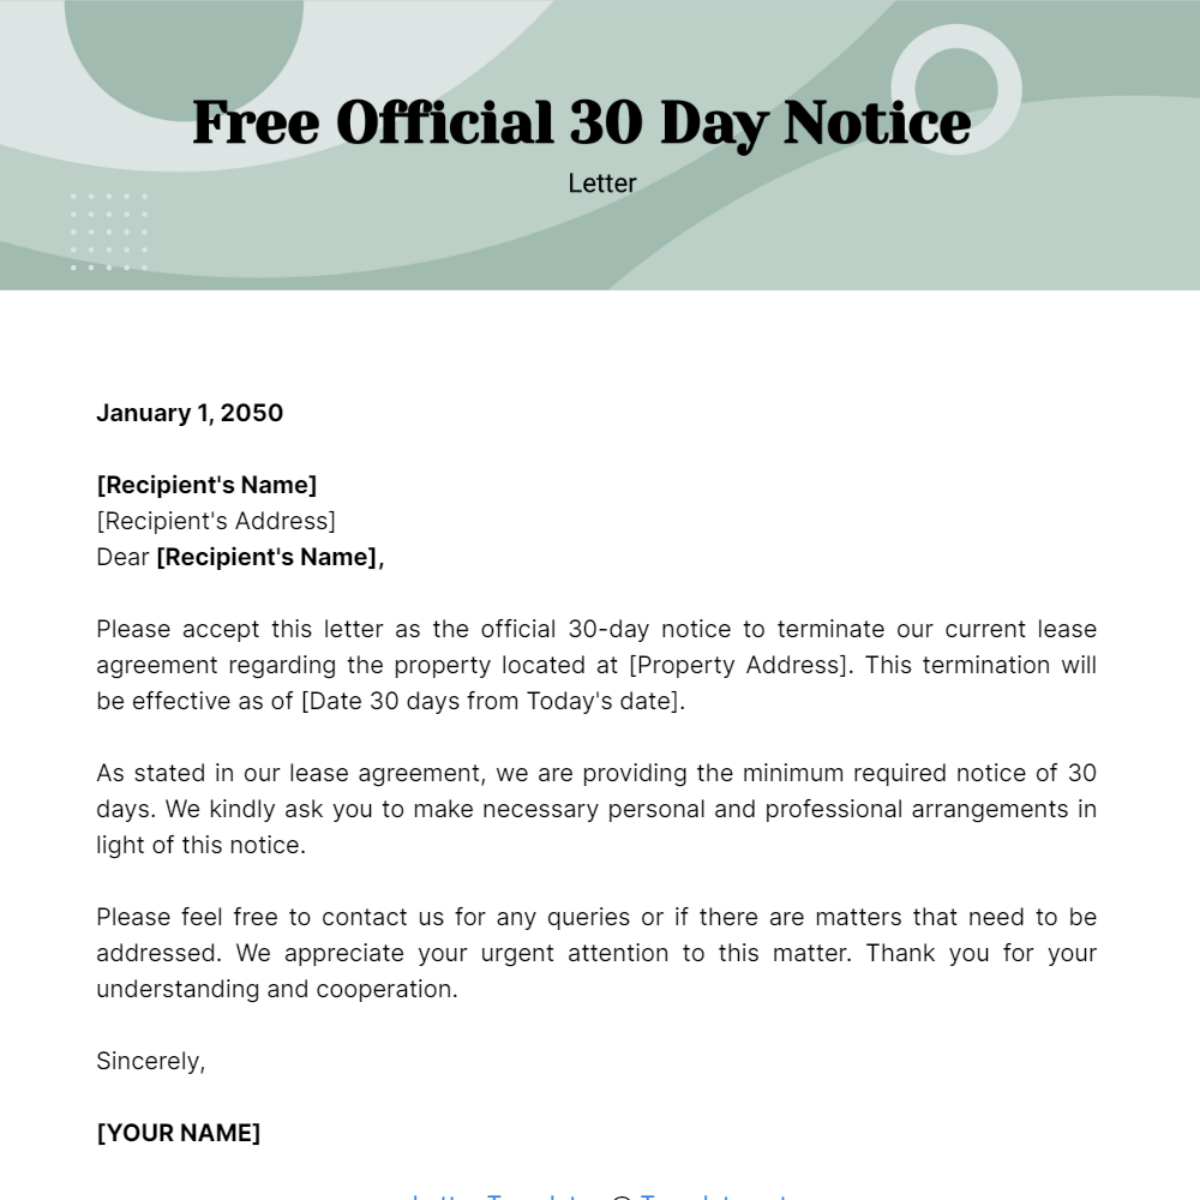 Official 30 Day Notice Letter Template